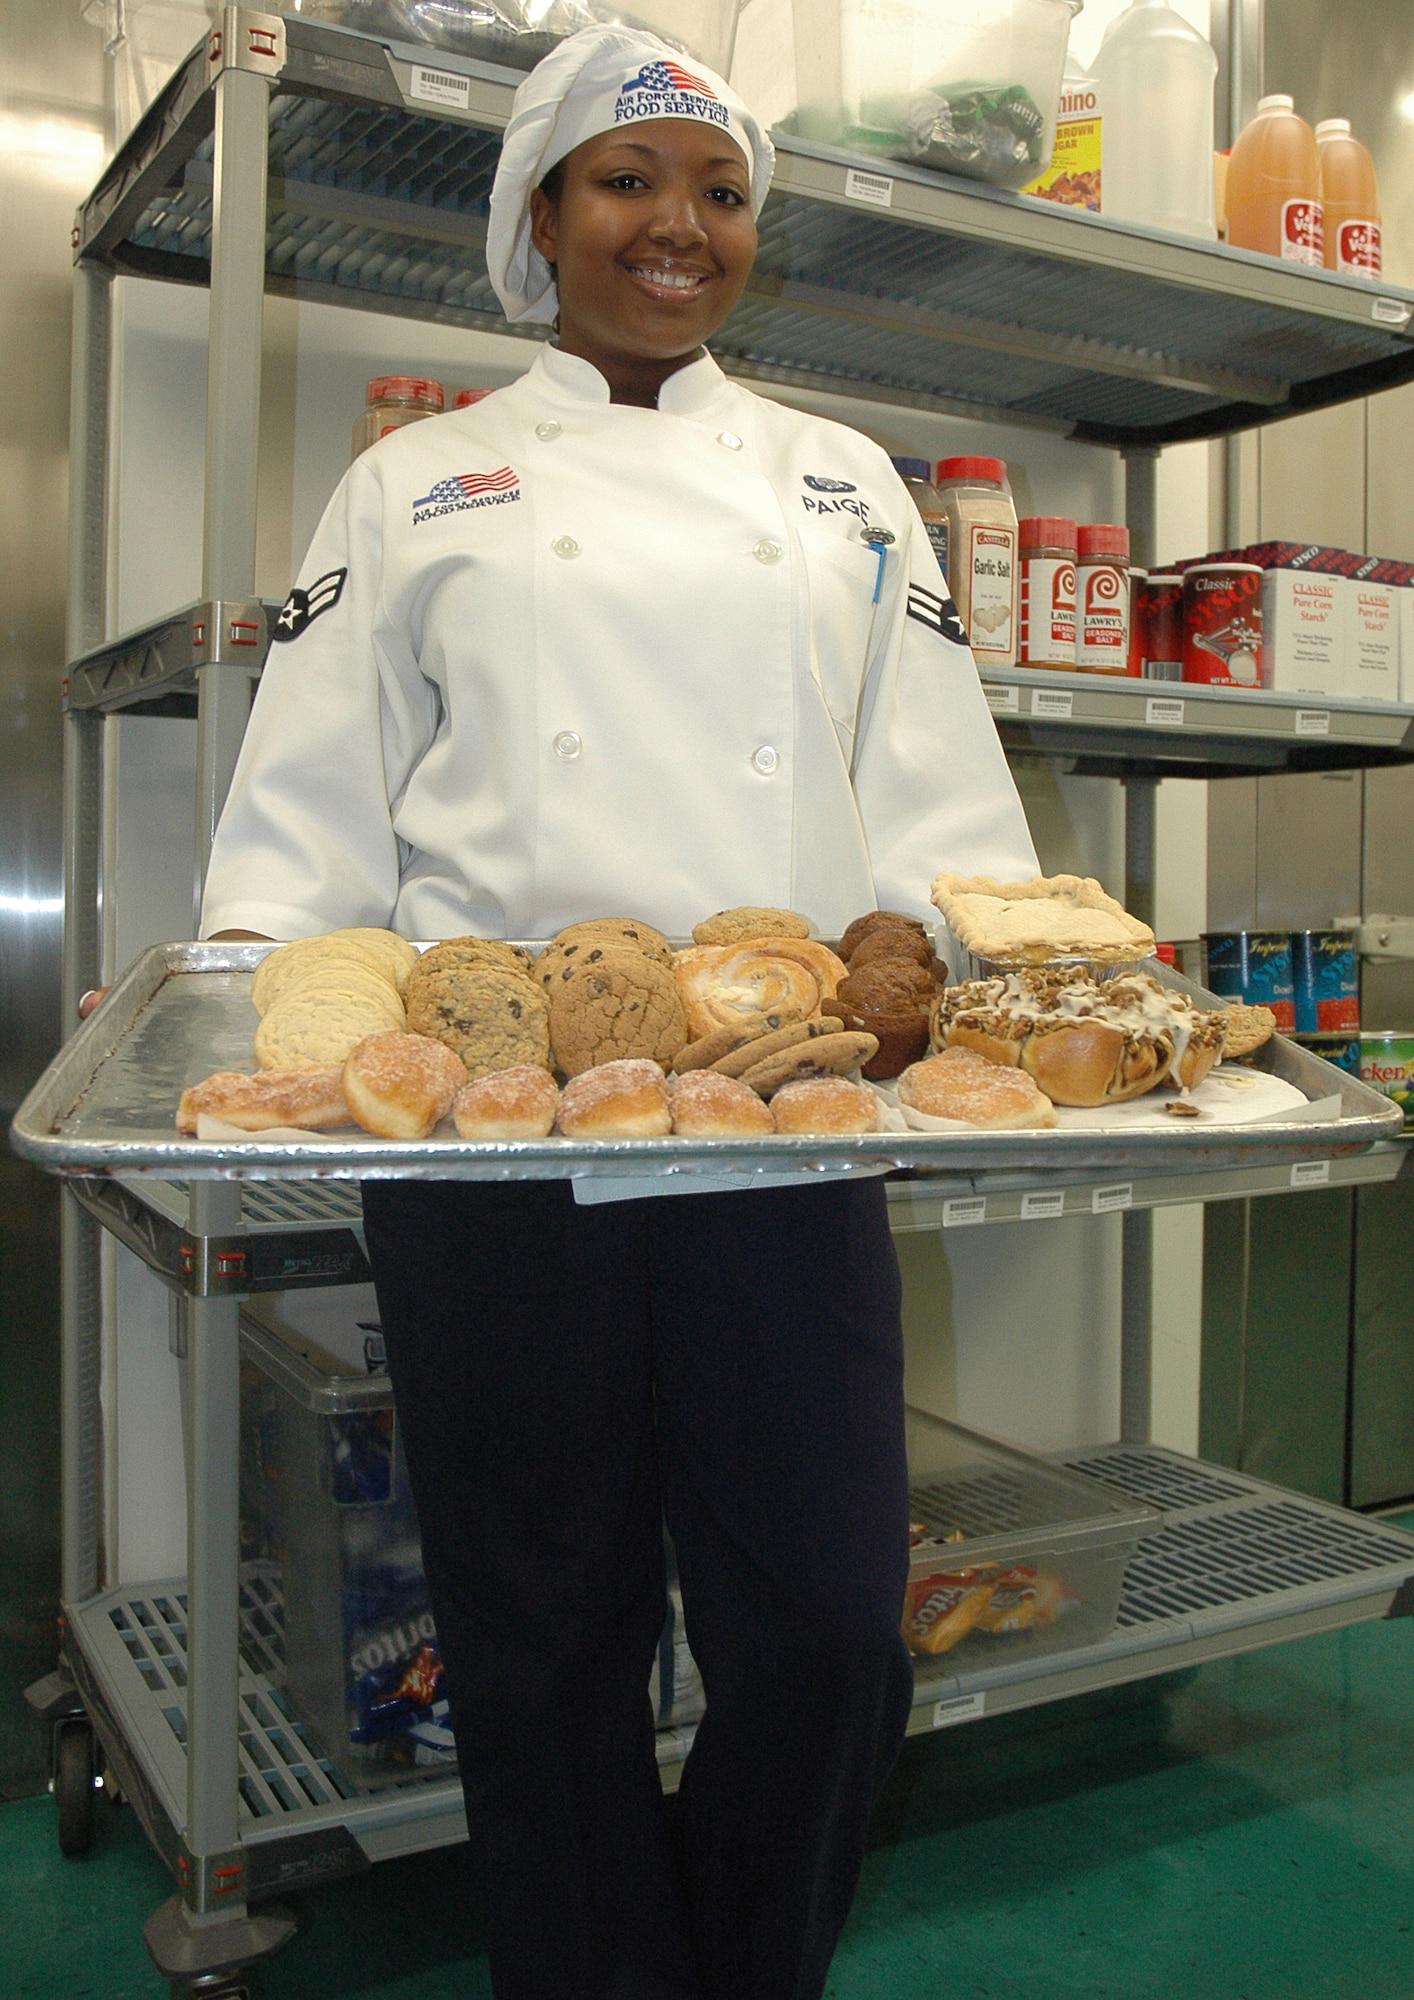 EGLIN AIR FORCE BASE, Fla -- Airman 1st Class Lydia Paige, 96th Services Squadron food service worker recently won the 2008 Hennessy Award multiple-facility category.